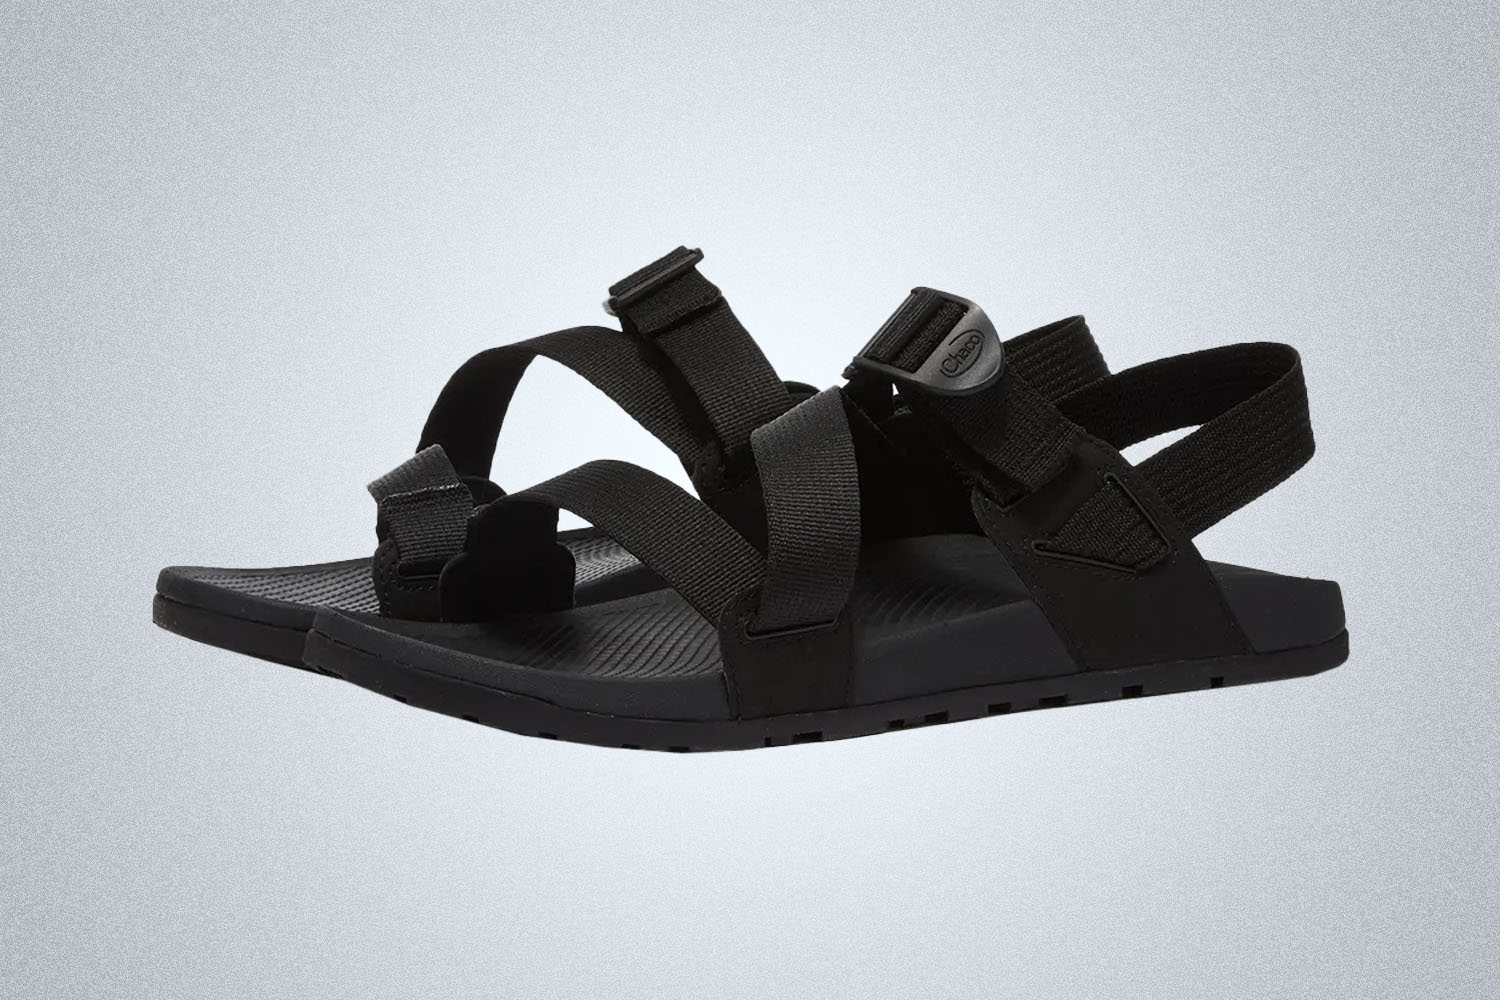 a pair of black slide sandals from Chacos on a grey background